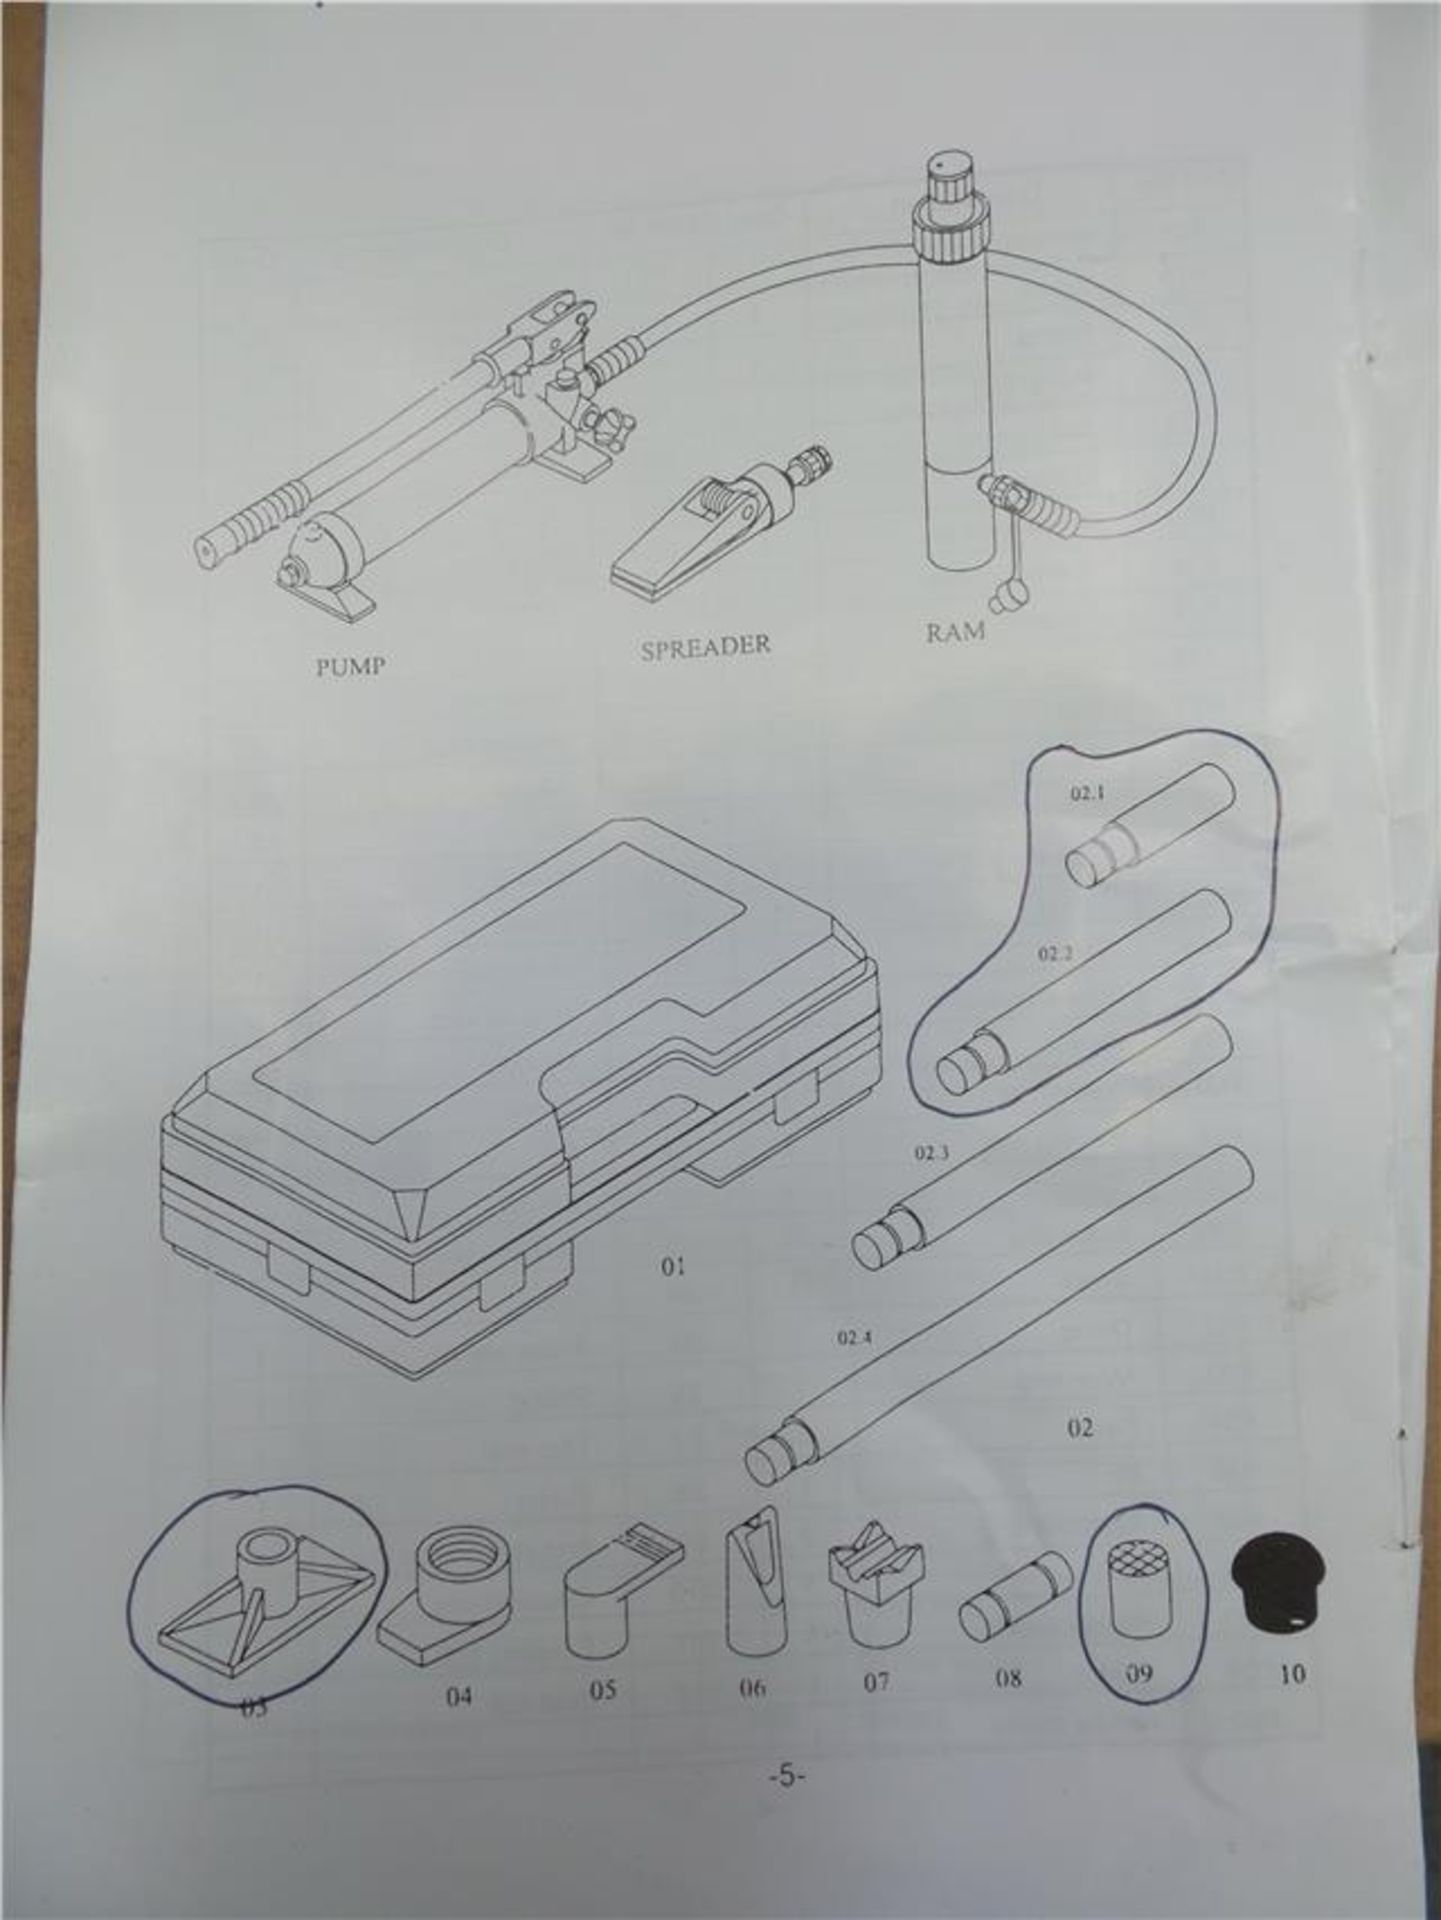 4 Ton Body Repair Kit (WORKING 0876) This is missing 2 attachments (see images Parts 3 & 9) ** Ex- - Image 2 of 2